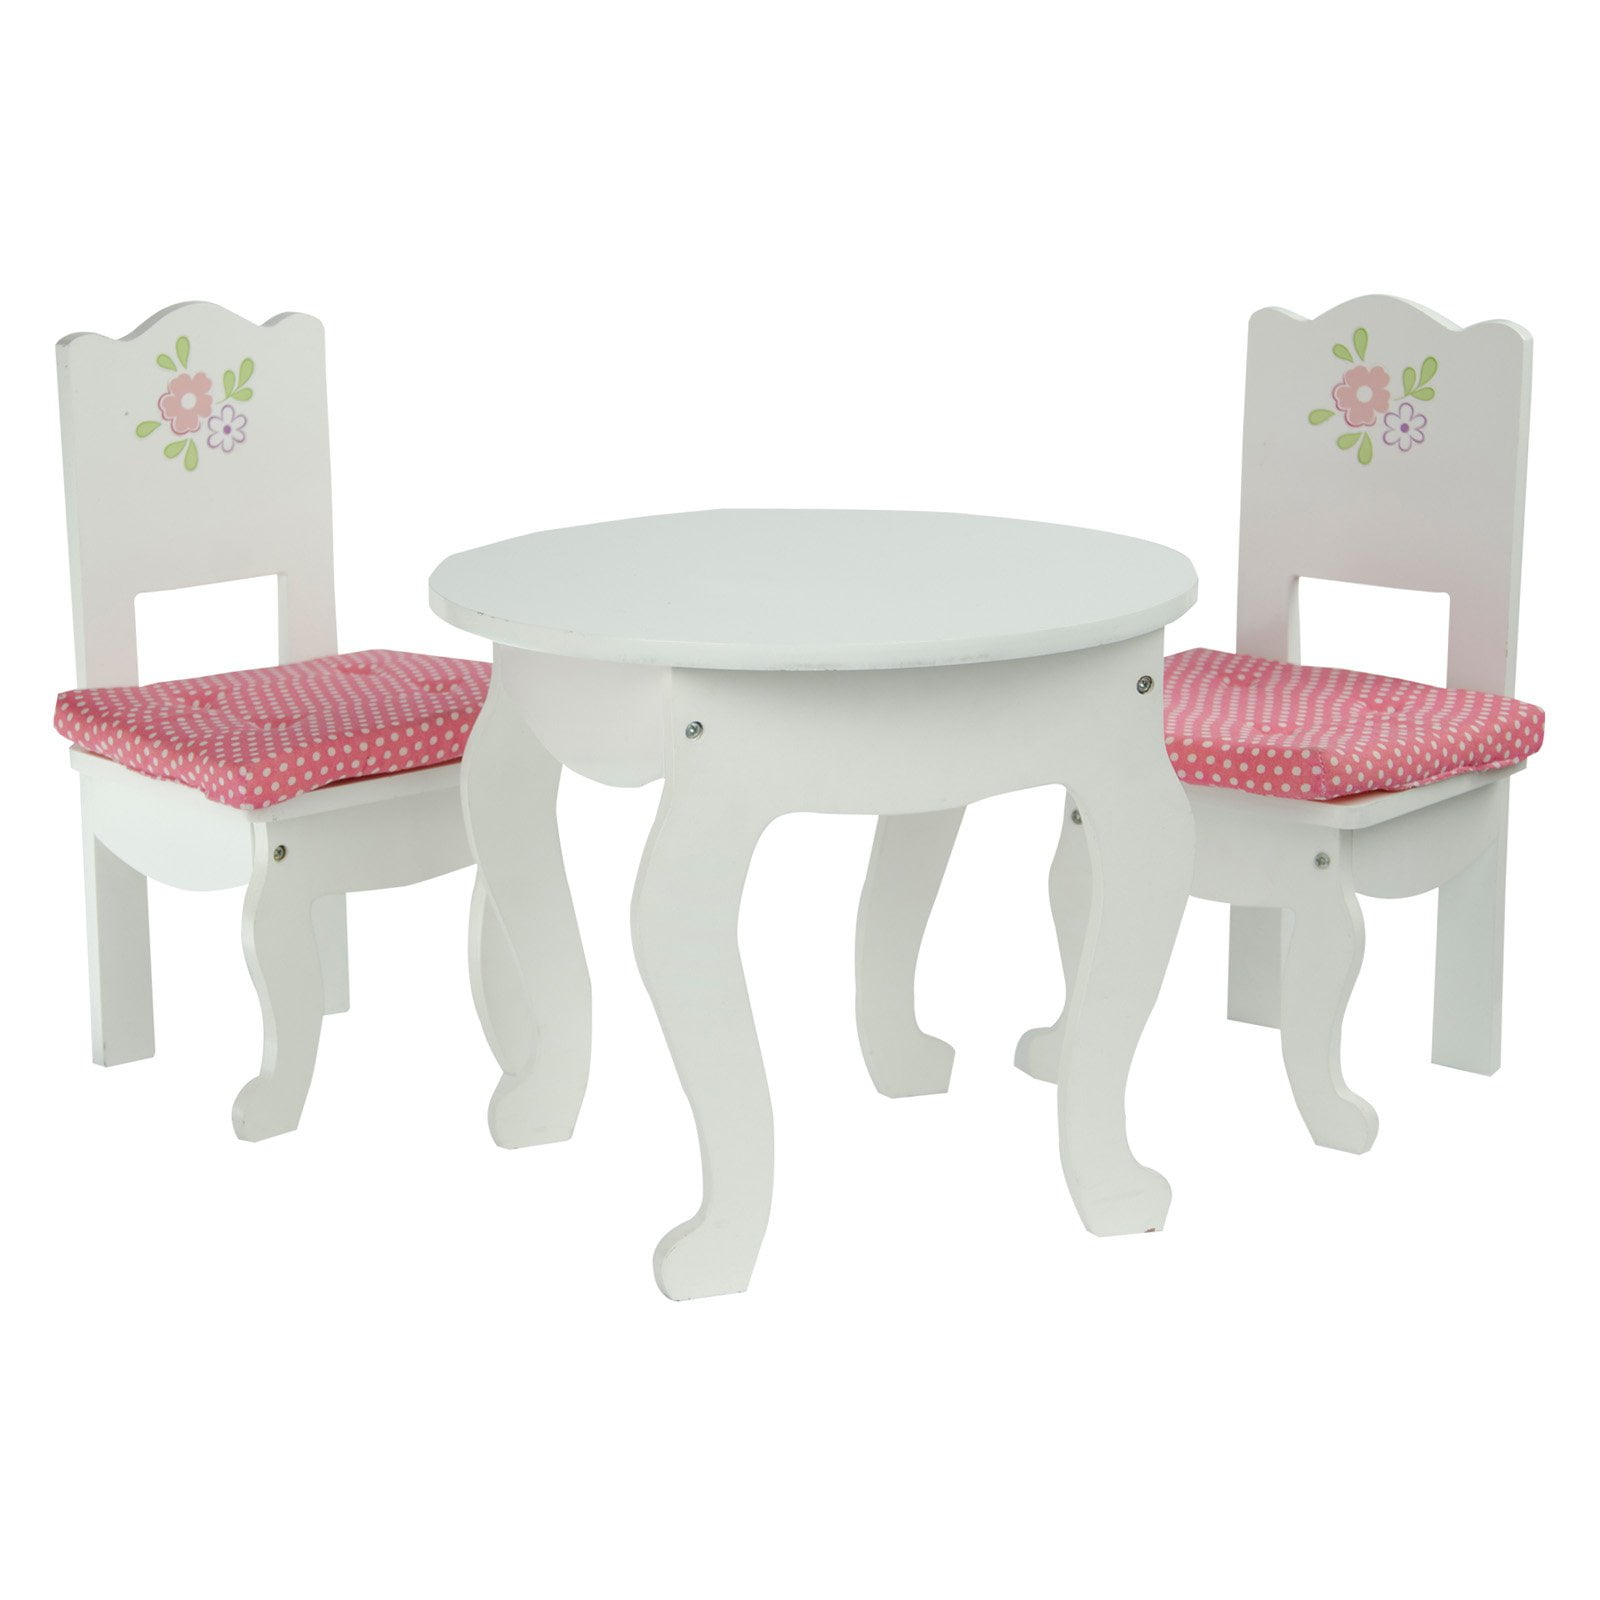 18 doll table and chairs